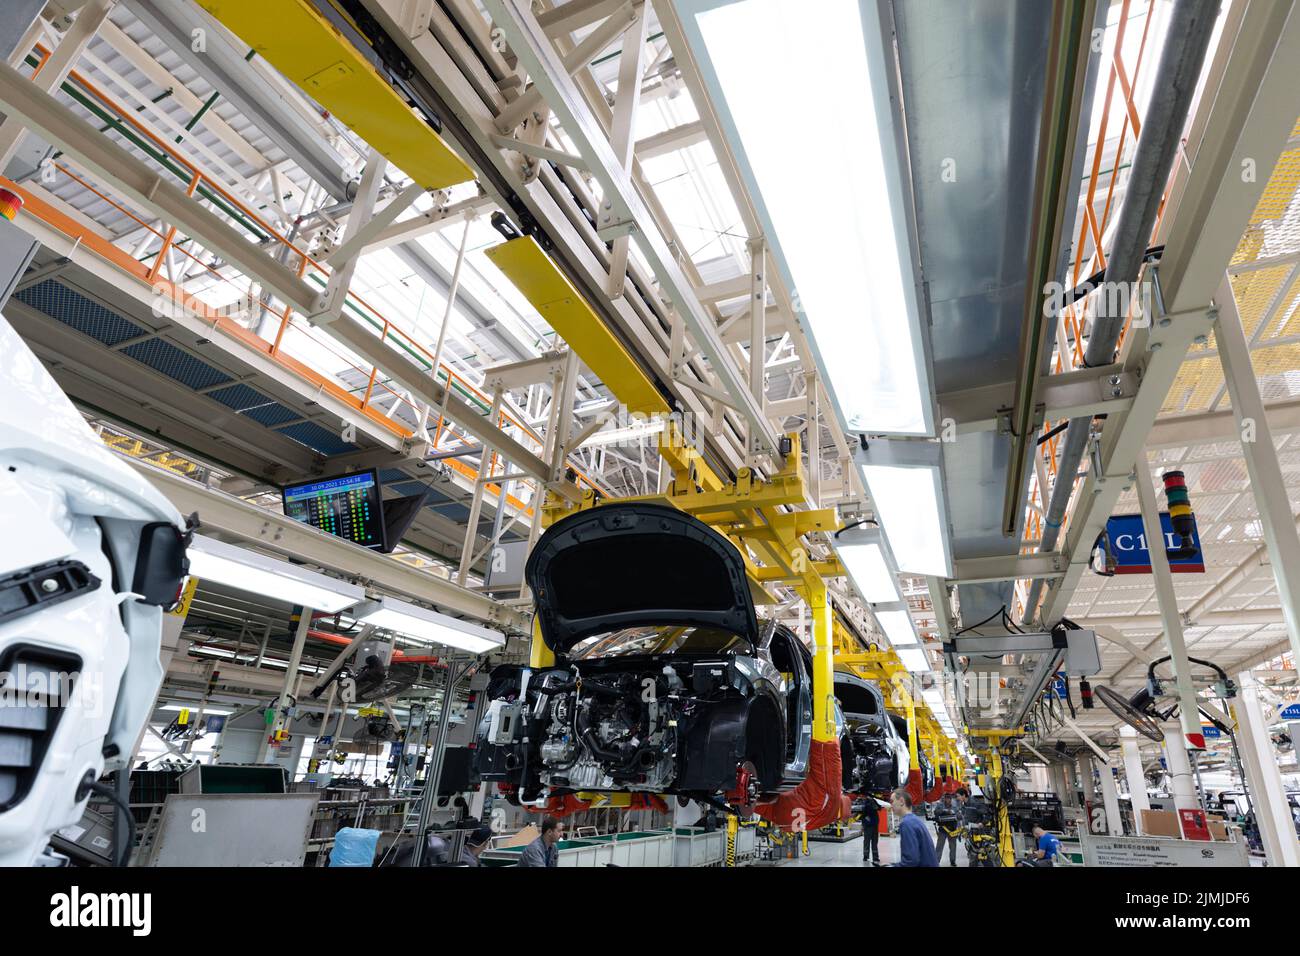 Minsk, Belarus - Dec 15, 2021: Car bodies are on assembly line. Factory for production of cars. Modern automotive industry. A ca Stock Photo